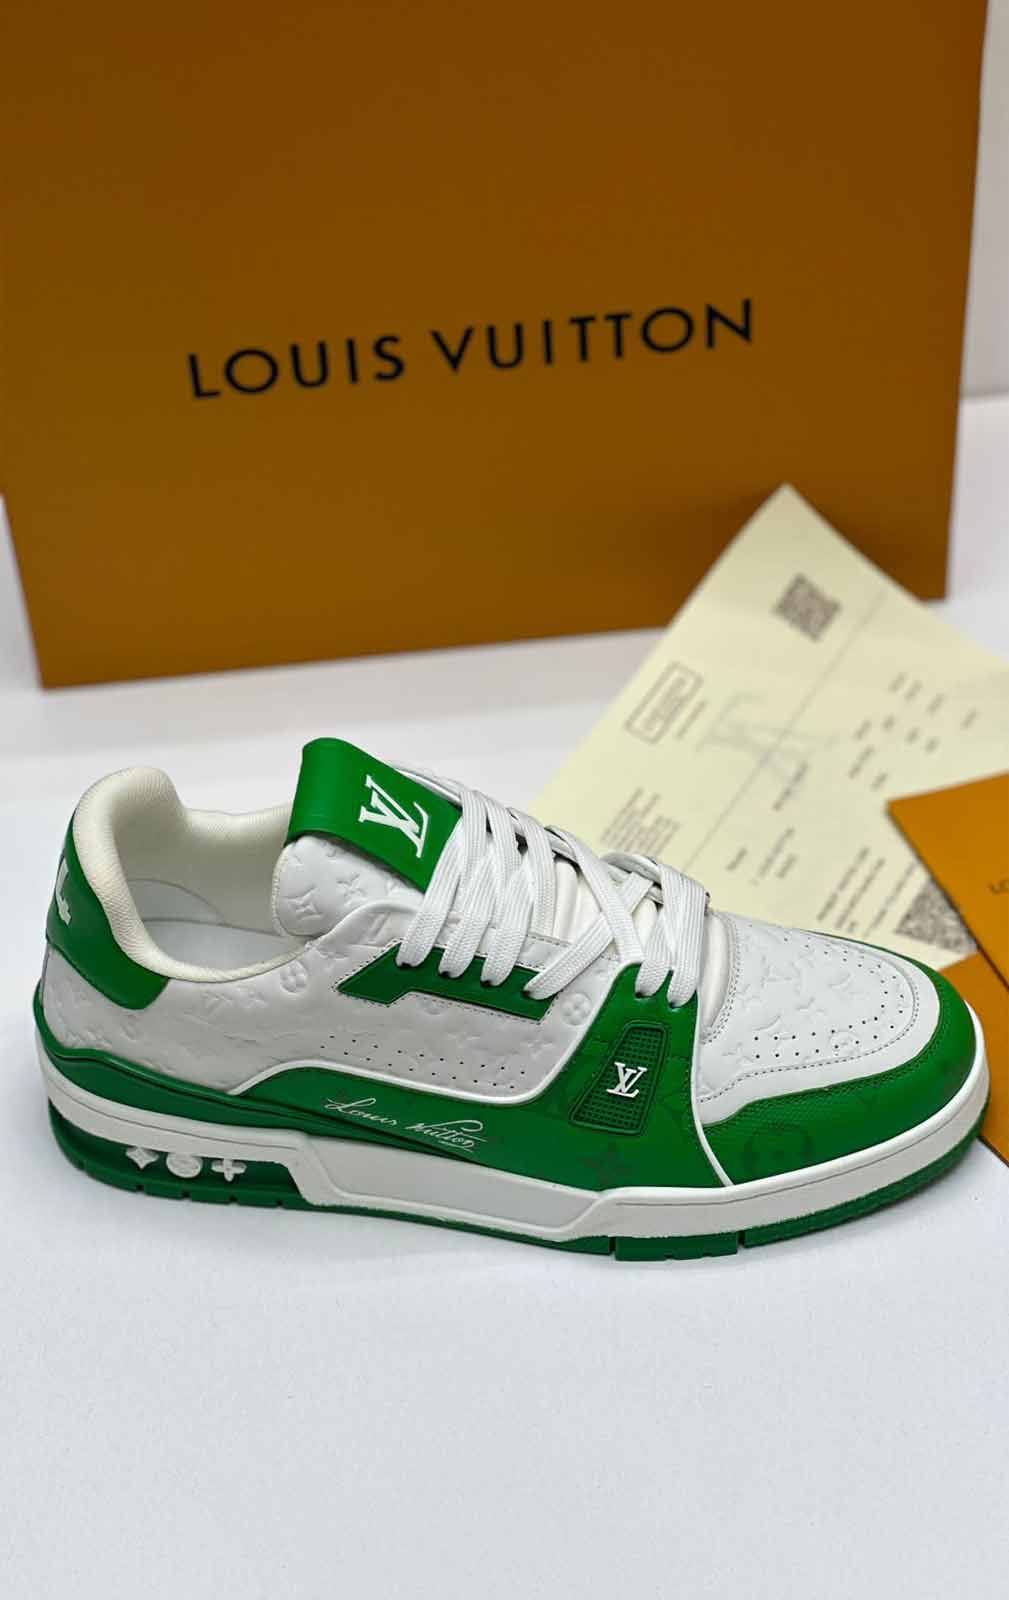 TRAINER YK GREEN WHITE SNEAKERS-L-110 (1)